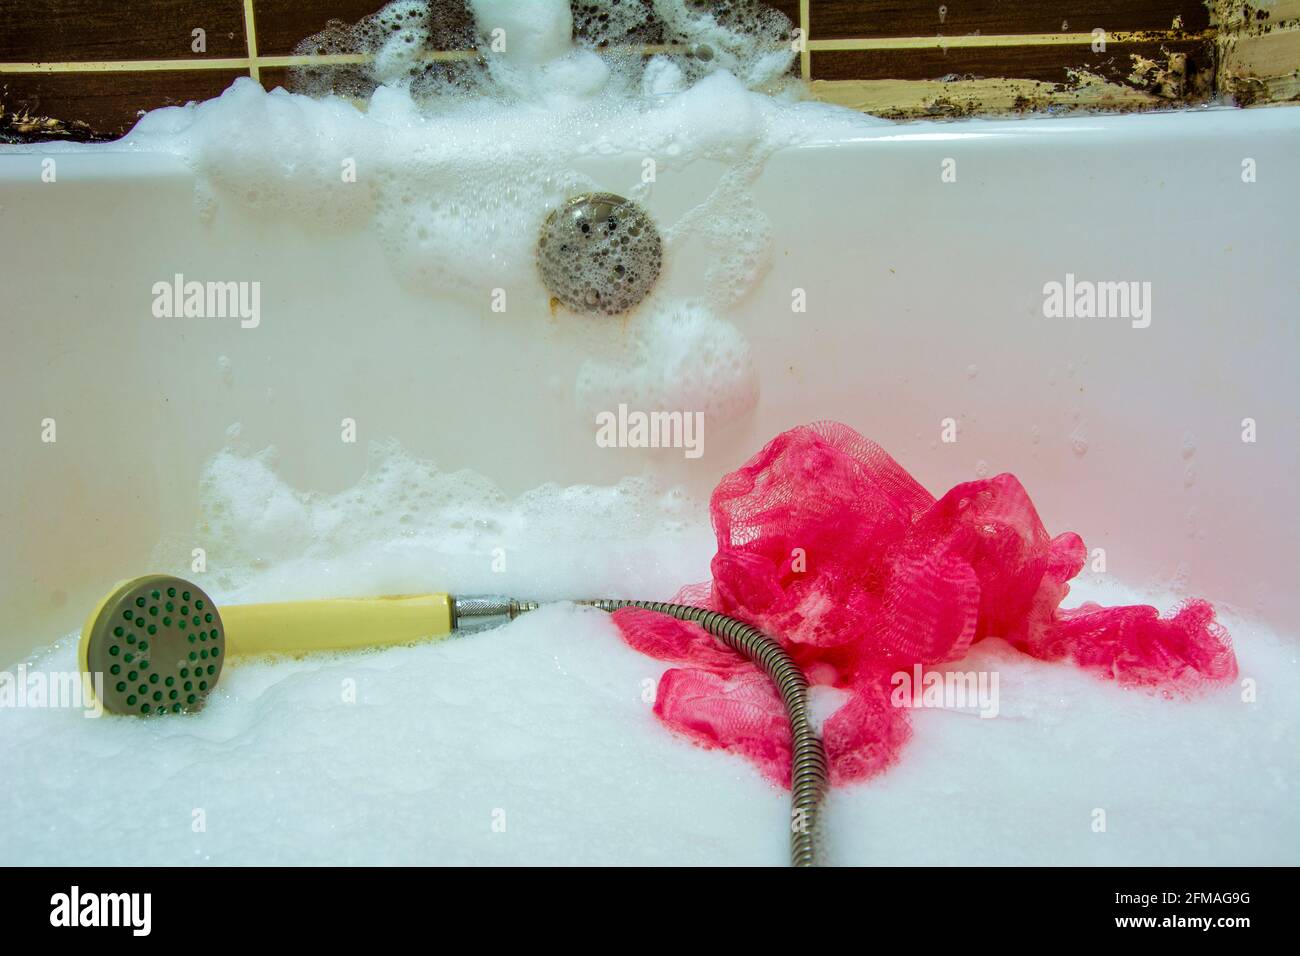 Shower head and shower sponge in a foamy bathtub in a bathroom with moldy walls Stock Photo